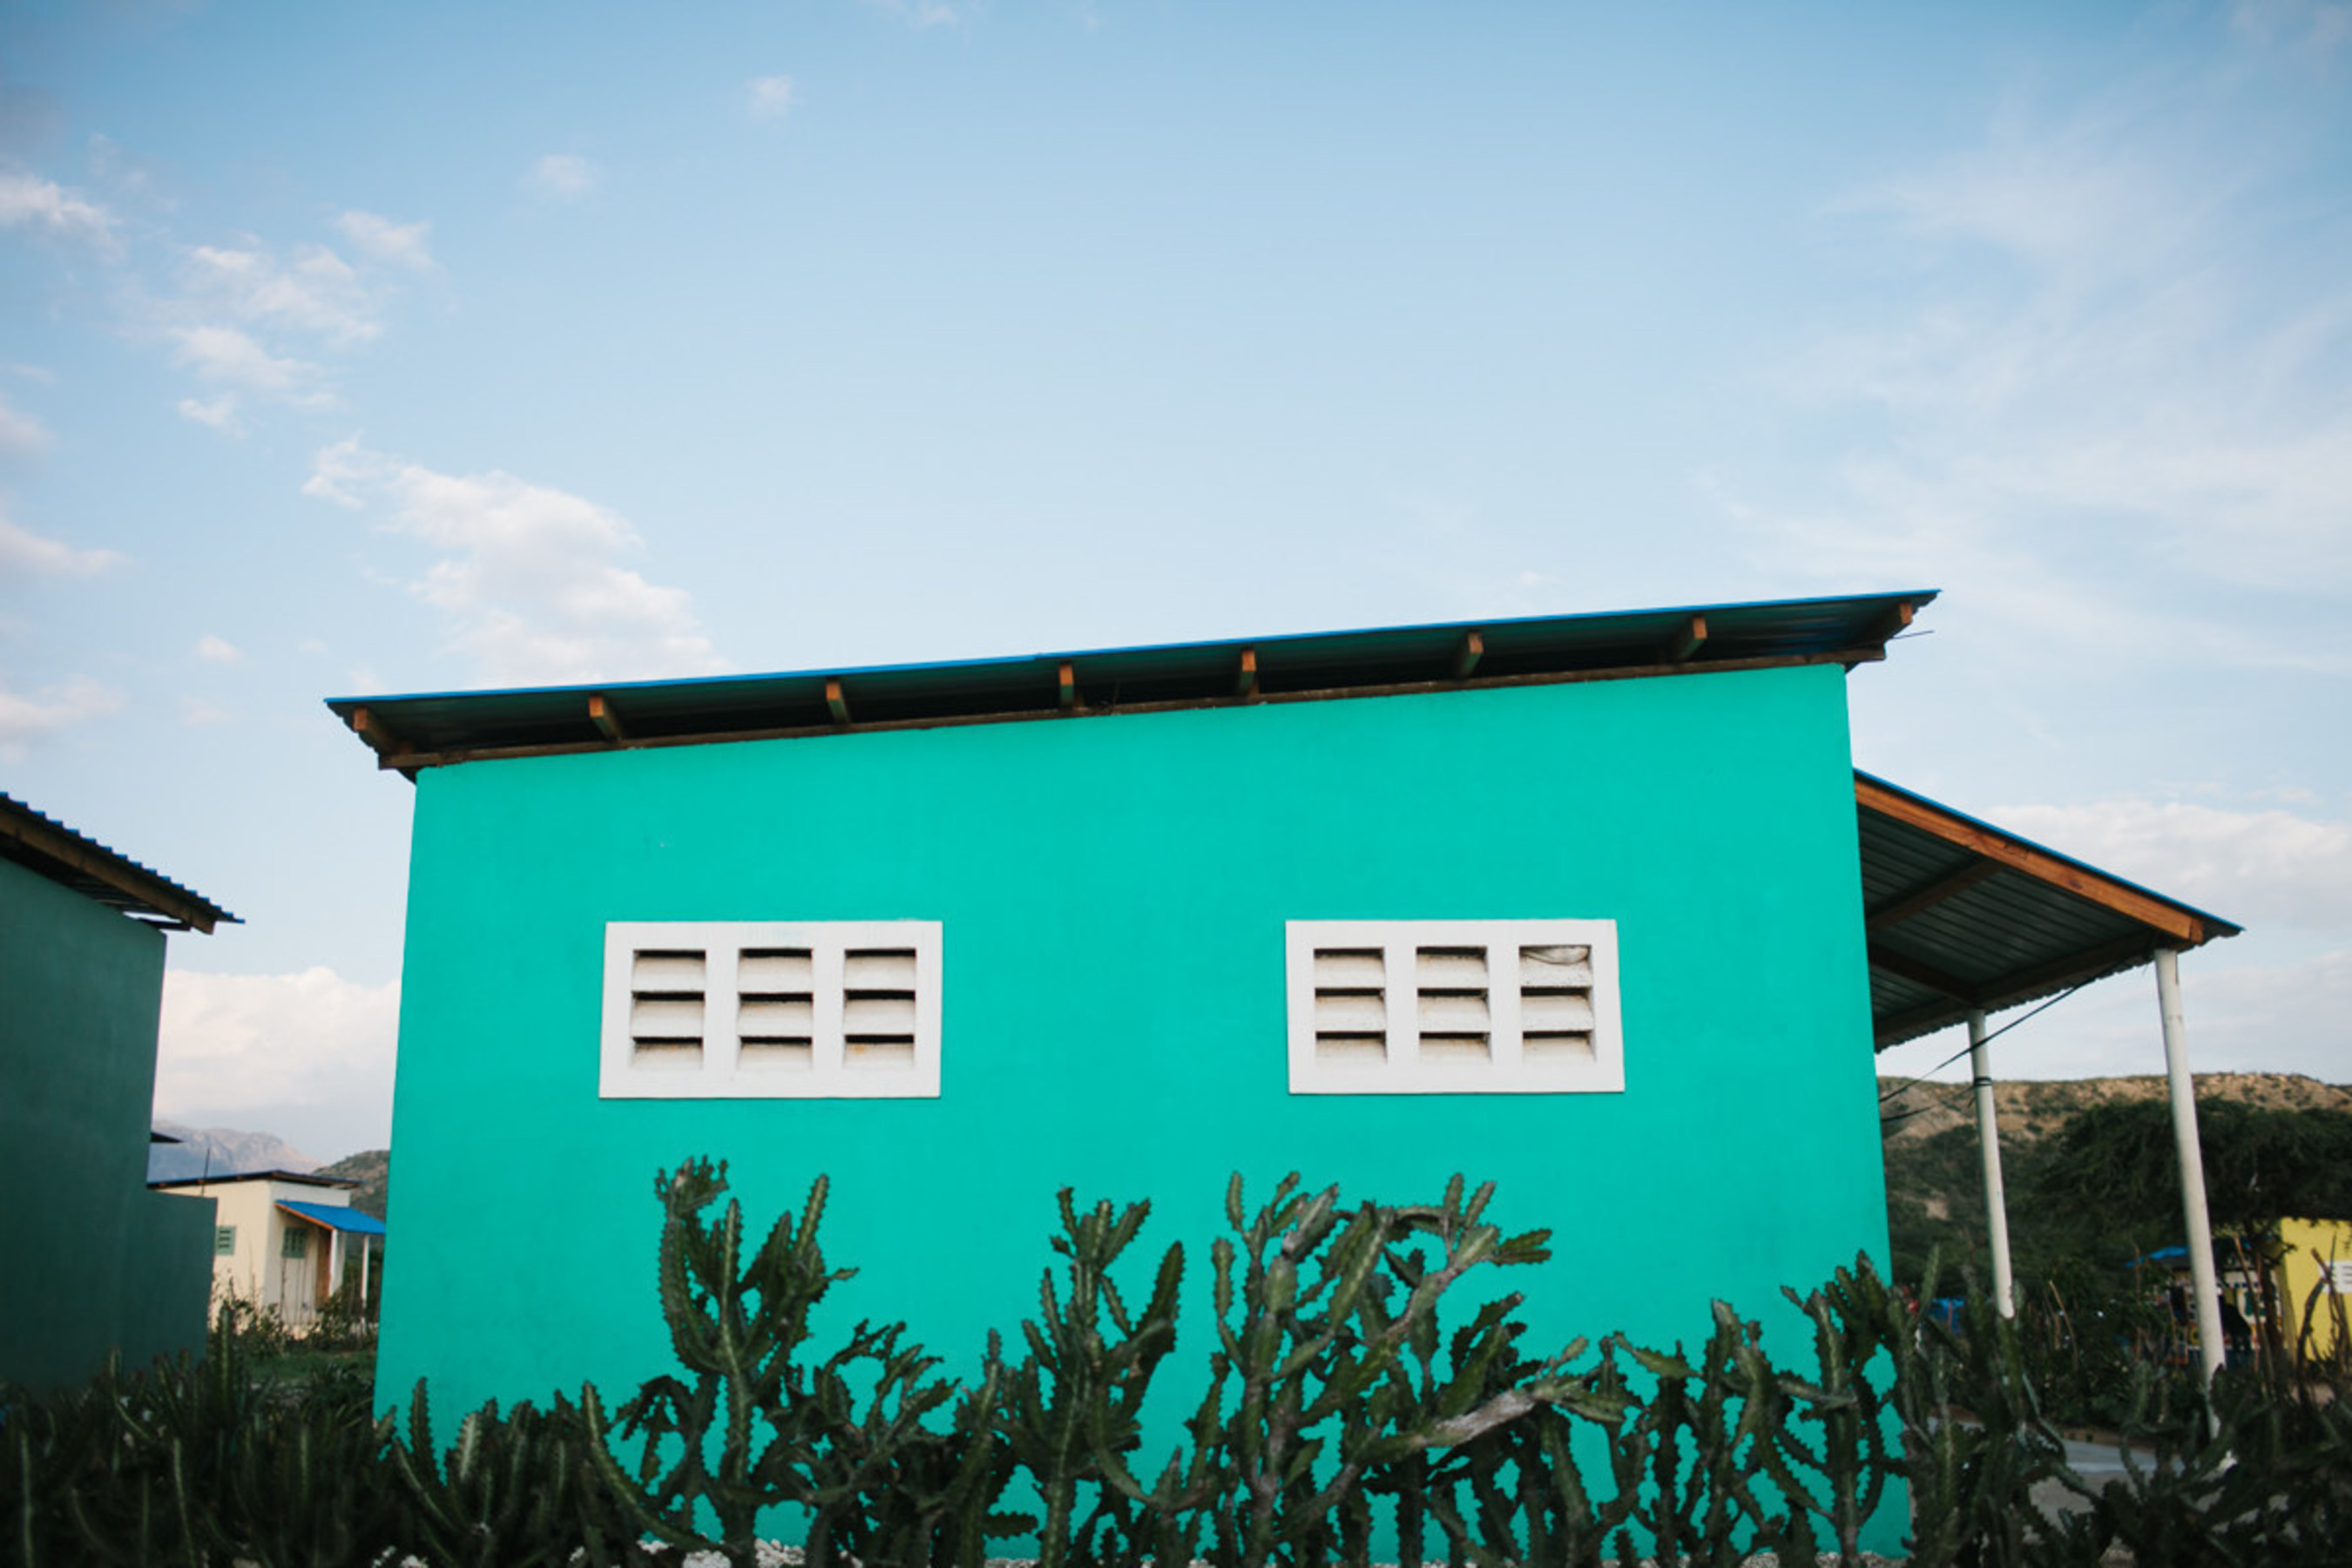 Better Homes and Gardens(R) Real Estate and New Story are teaming up to build families of Ahuachapan, El Salvador life-changing homes (like the one seen here) that will offer safety, clean running water, and electricity.